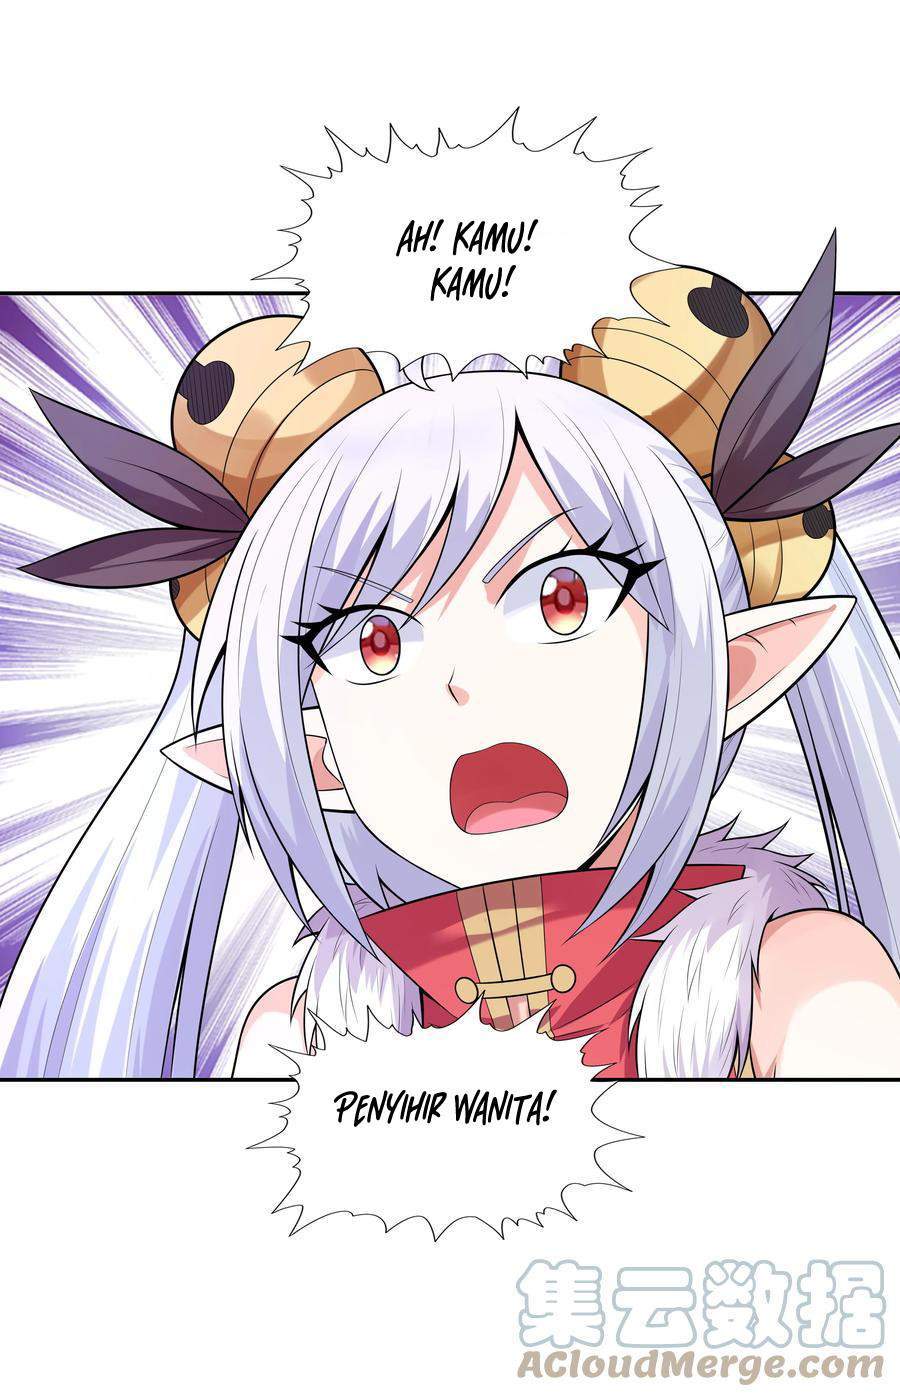 My Harem Is Entirely Female Demon Villains Chapter 16